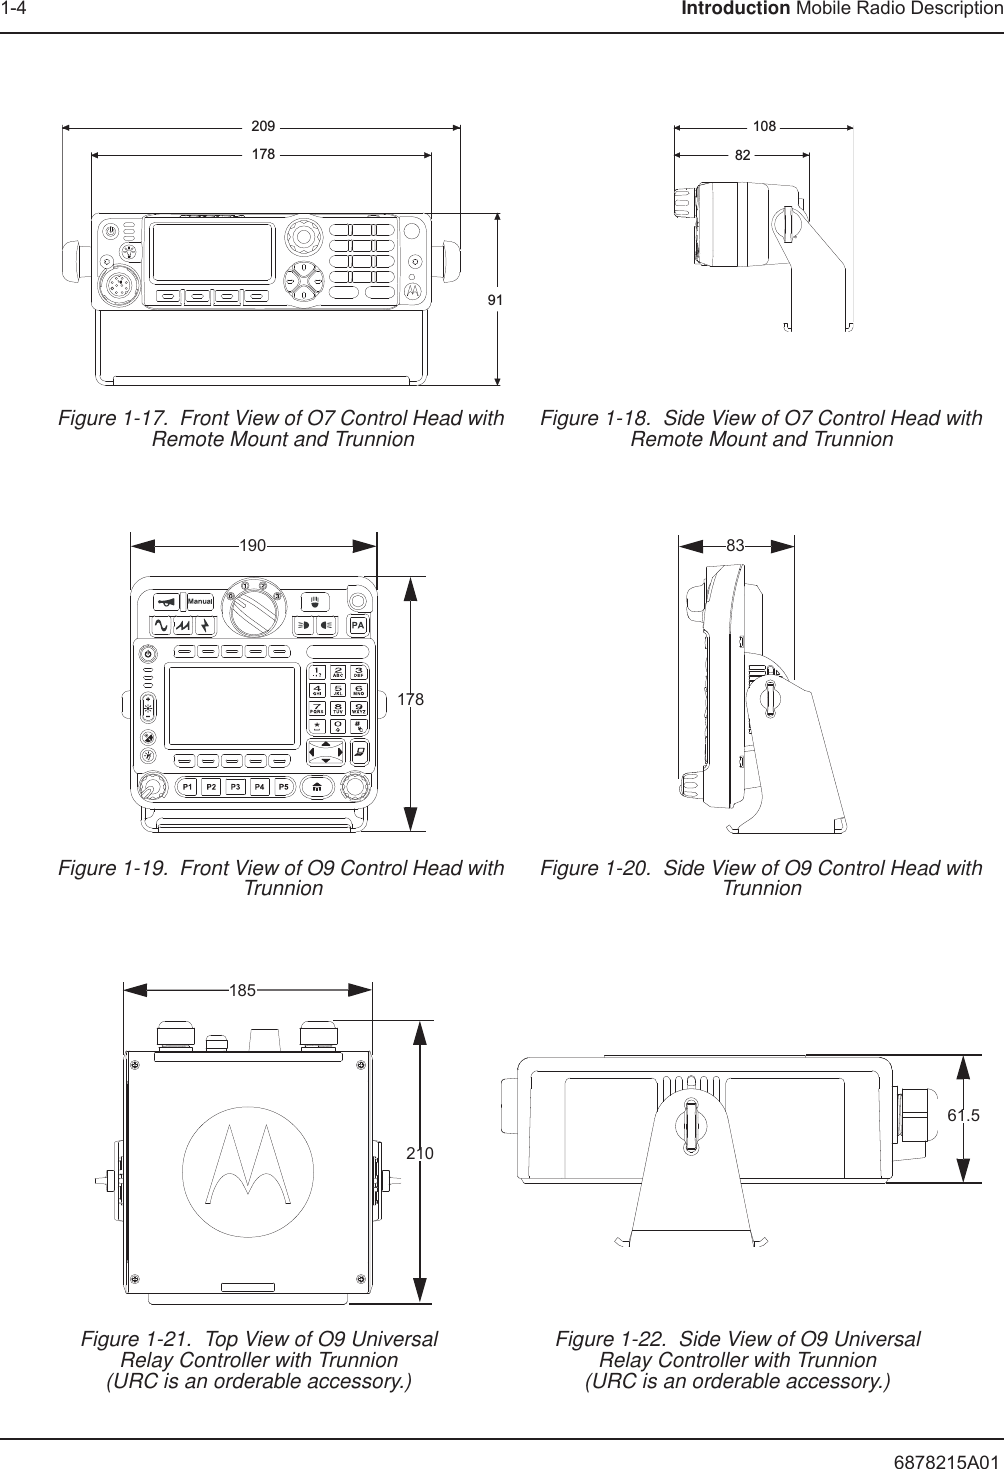 6878215A011-4 Introduction Mobile Radio DescriptionFigure 1-17.  Front View of O7 Control Head with Remote Mount and Trunnion Figure 1-18.  Side View of O7 Control Head with Remote Mount and TrunnionFigure 1-19.  Front View of O9 Control Head with Trunnion Figure 1-20.  Side View of O9 Control Head with TrunnionFigure 1-21.  Top View of O9 UniversalRelay Controller with Trunnion(URC is an orderable accessory.)Figure 1-22.  Side View of O9 UniversalRelay Controller with Trunnion(URC is an orderable accessory.)2091789110882178190 8318521061.5